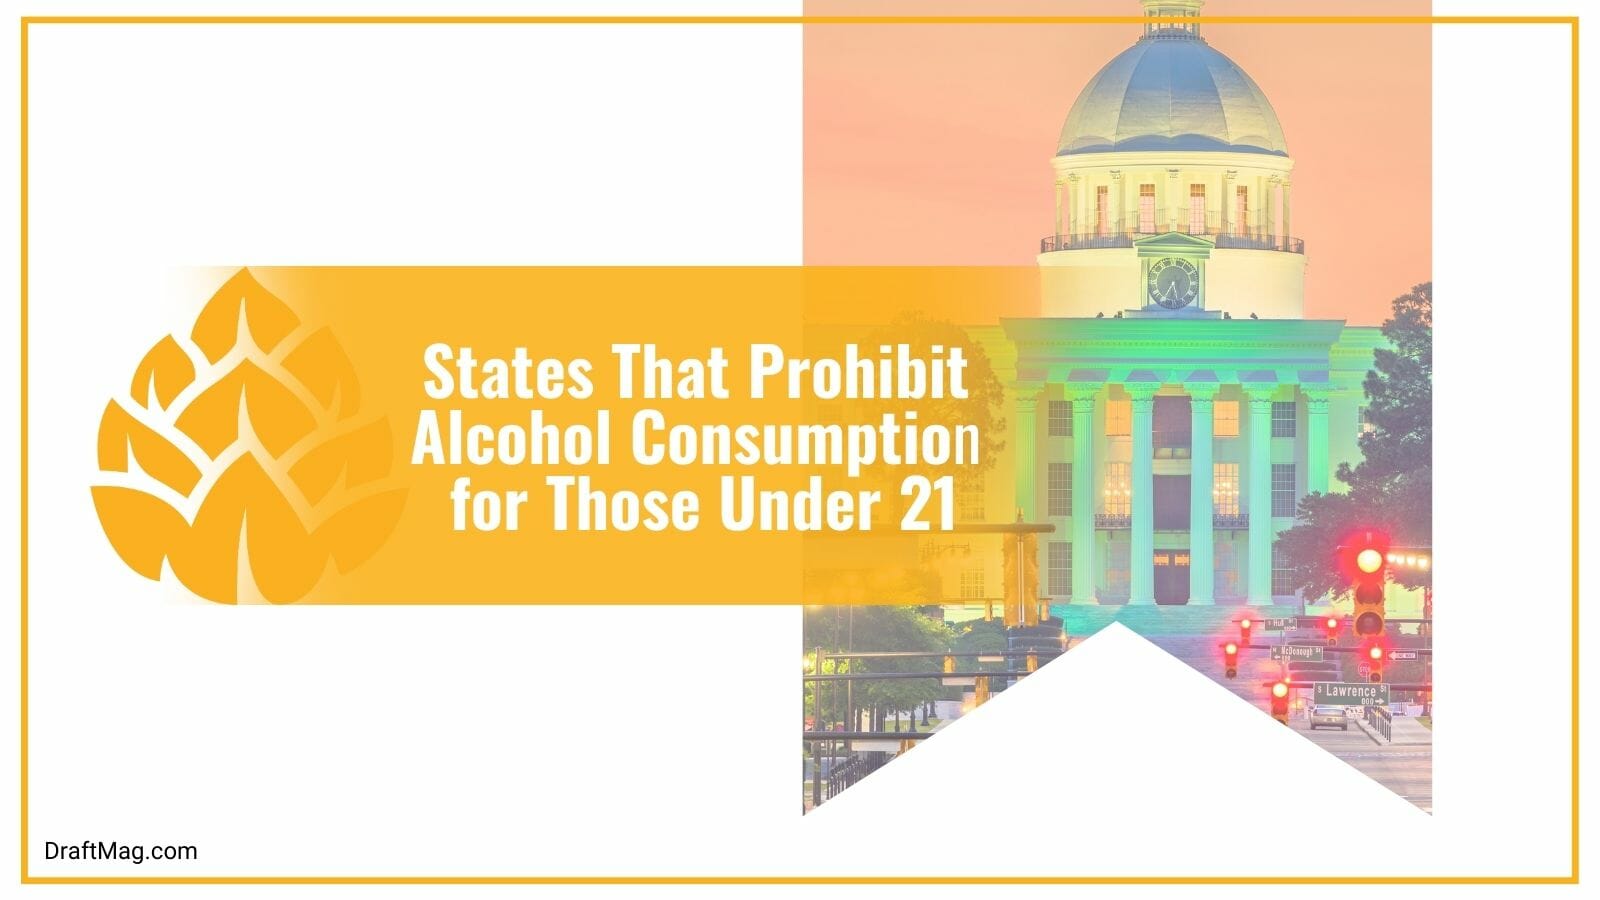 States That Prohibit Alcohol Consumption for Those Under 21